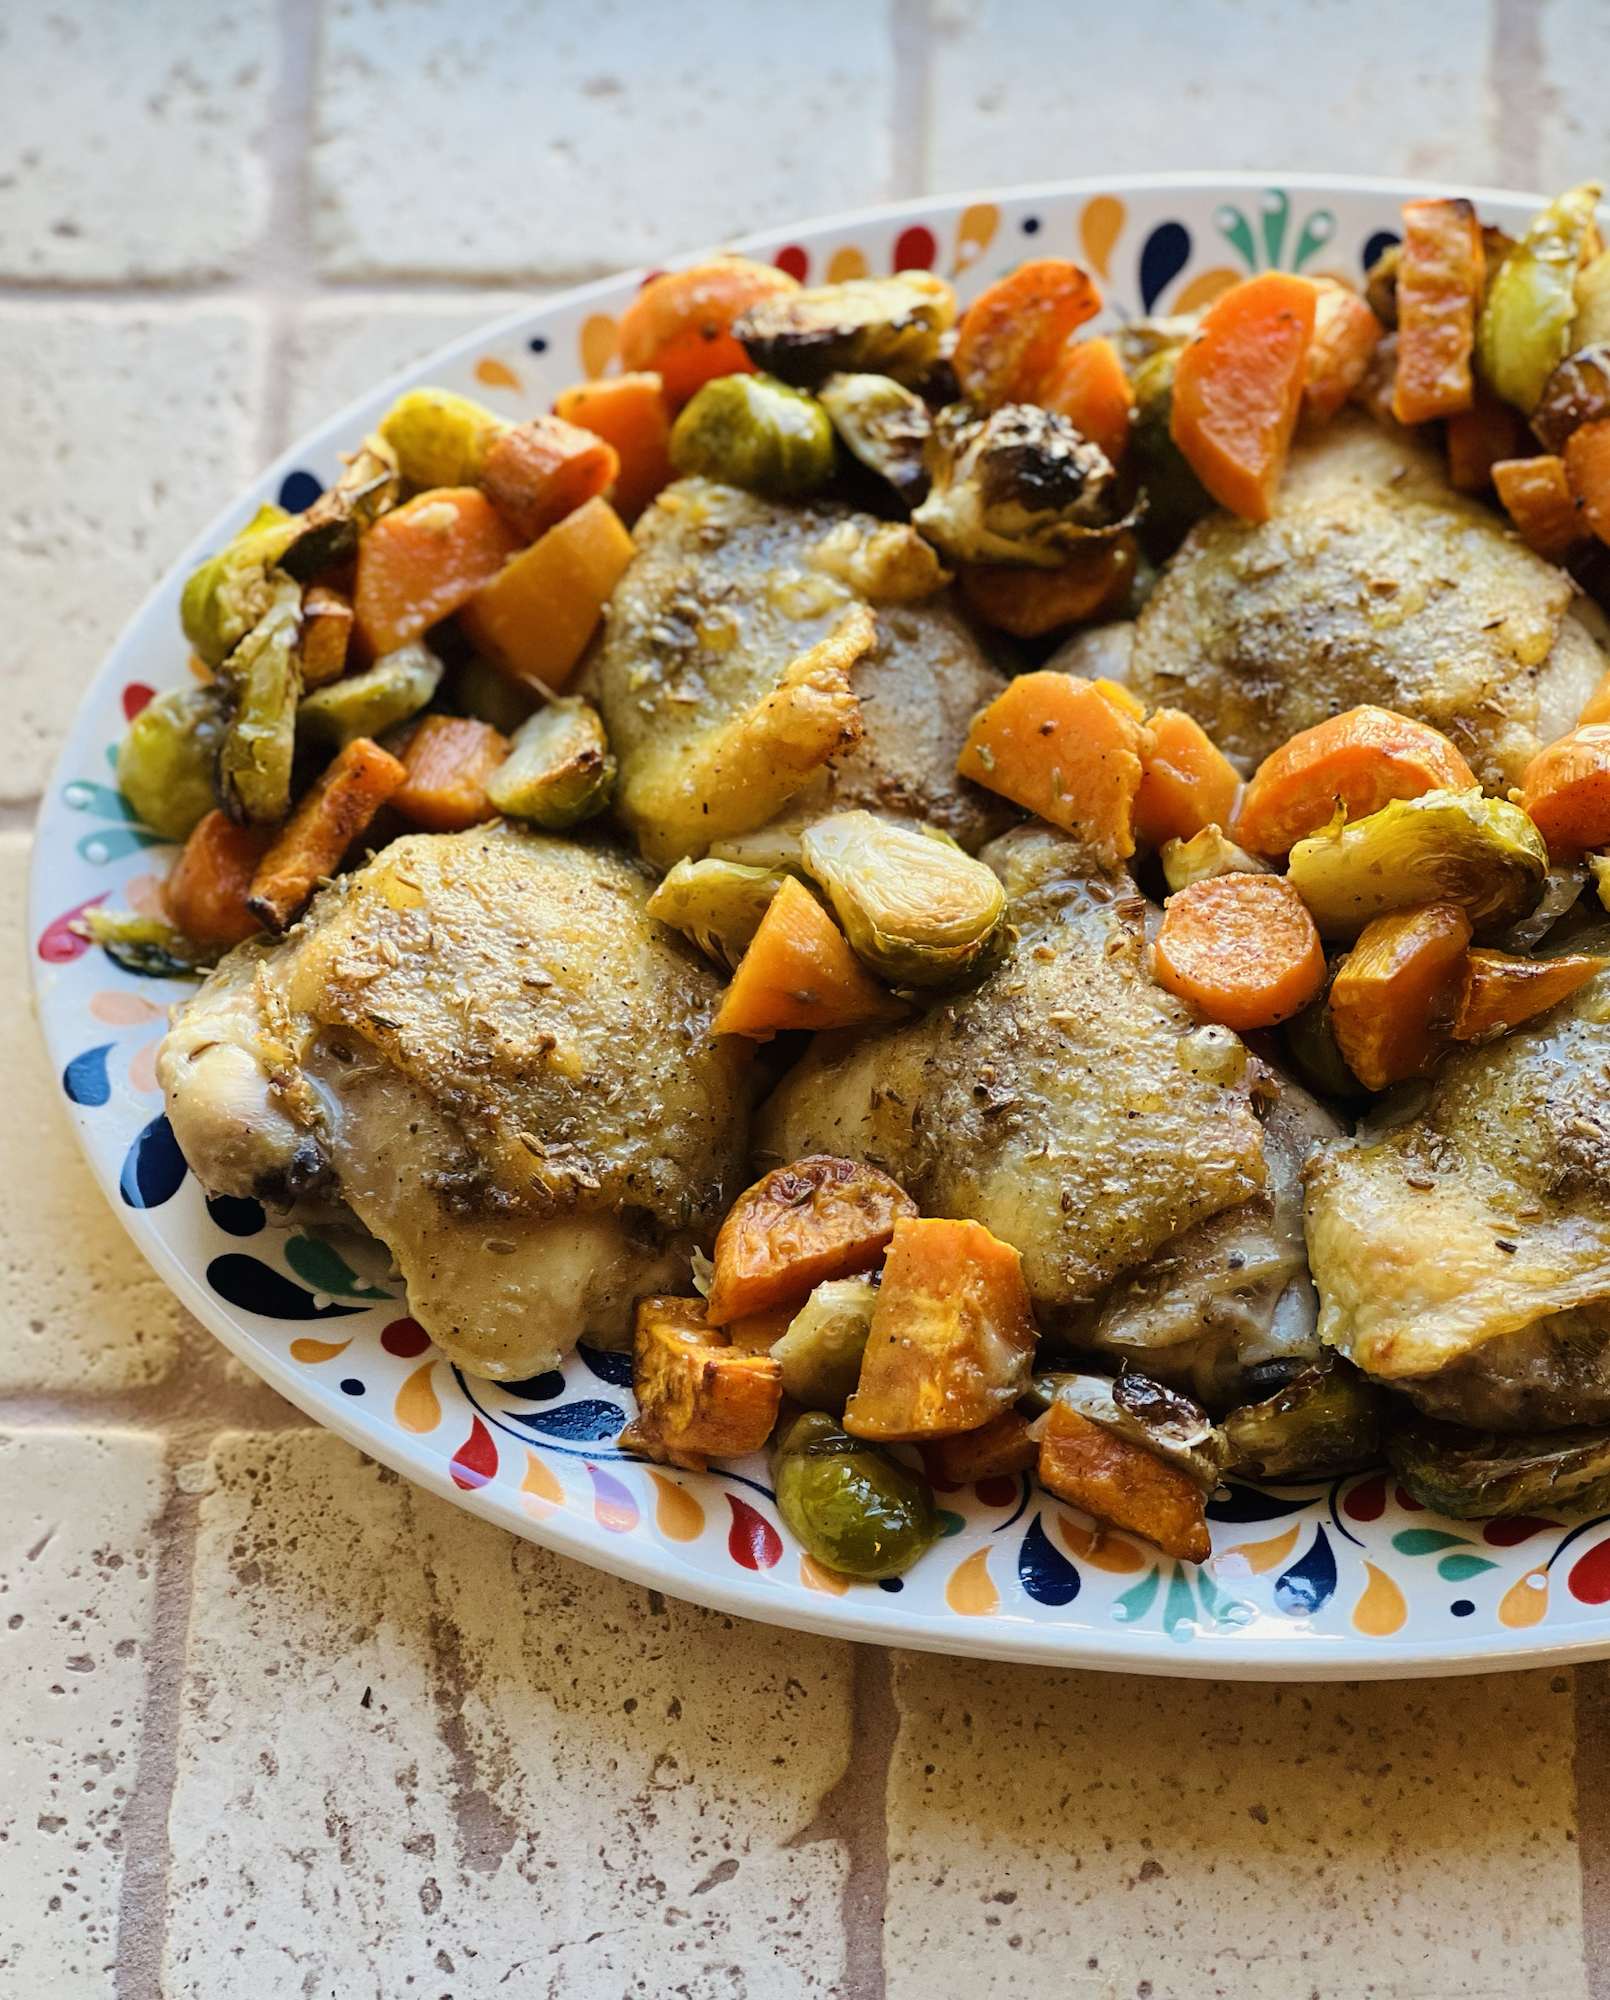 Fennel-Crusted Chicken With Vegetables Tray Bake